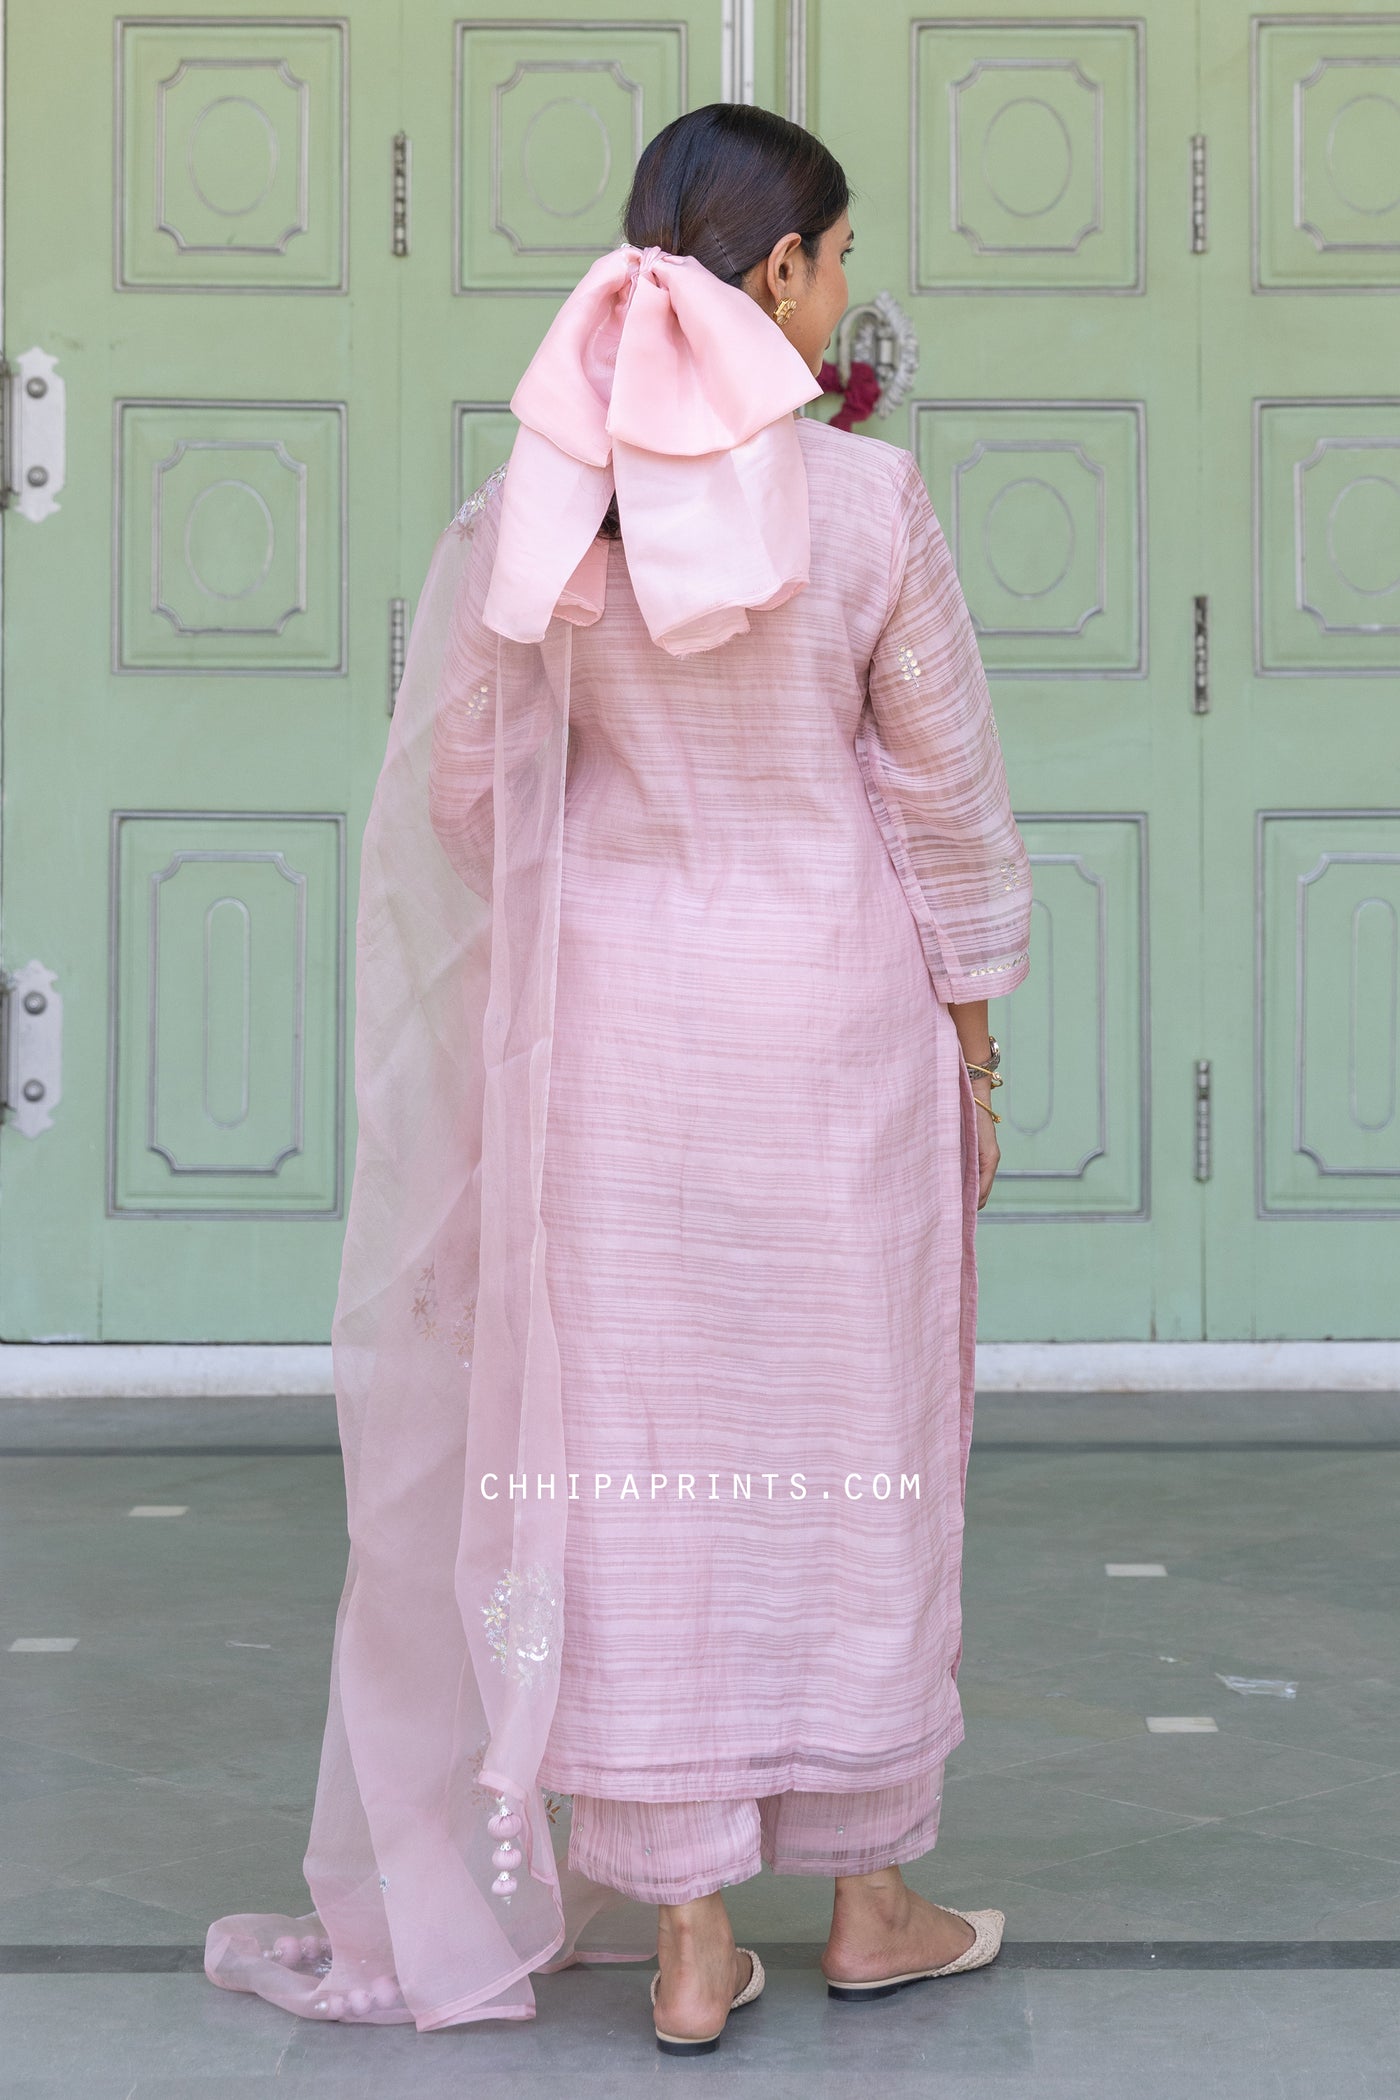 Chanderi Silk Dobby Gota Patti Suit Set in Pale Mauve from Inaayat Collection